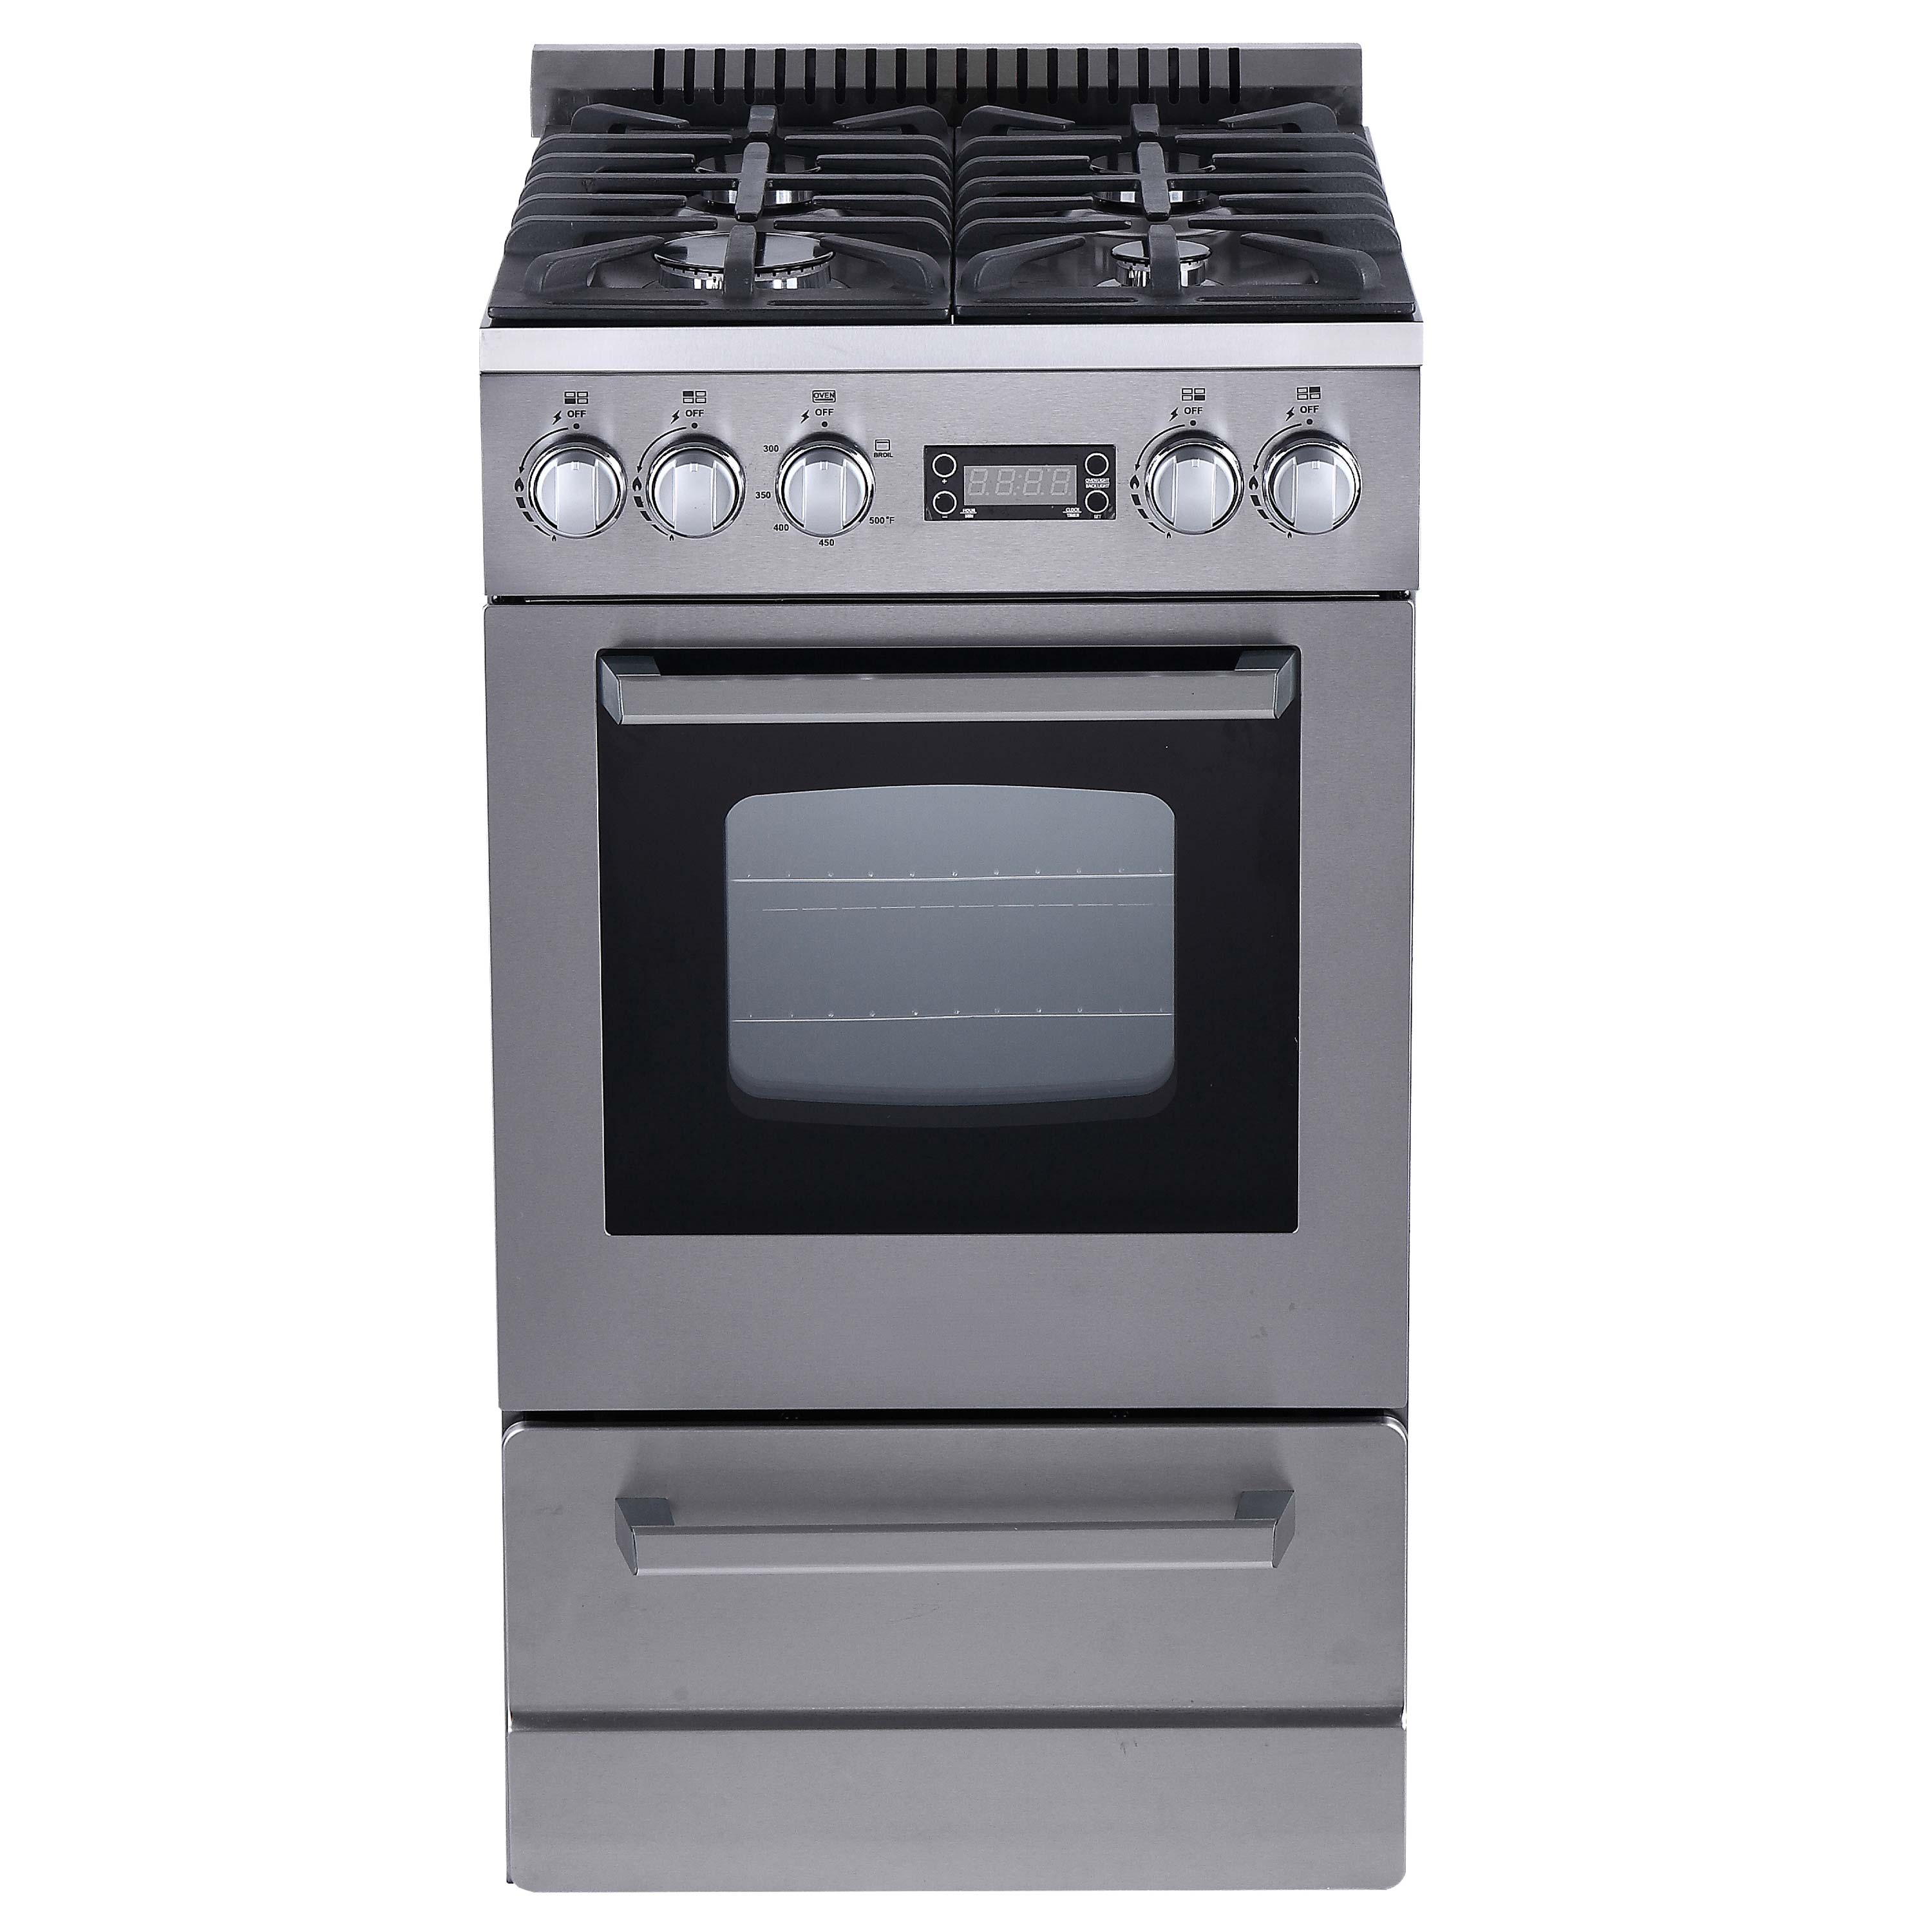 Avanti 20 Electric Range Oven with Framed Glass Door, in Stainless Steel  (ERU200P3S)